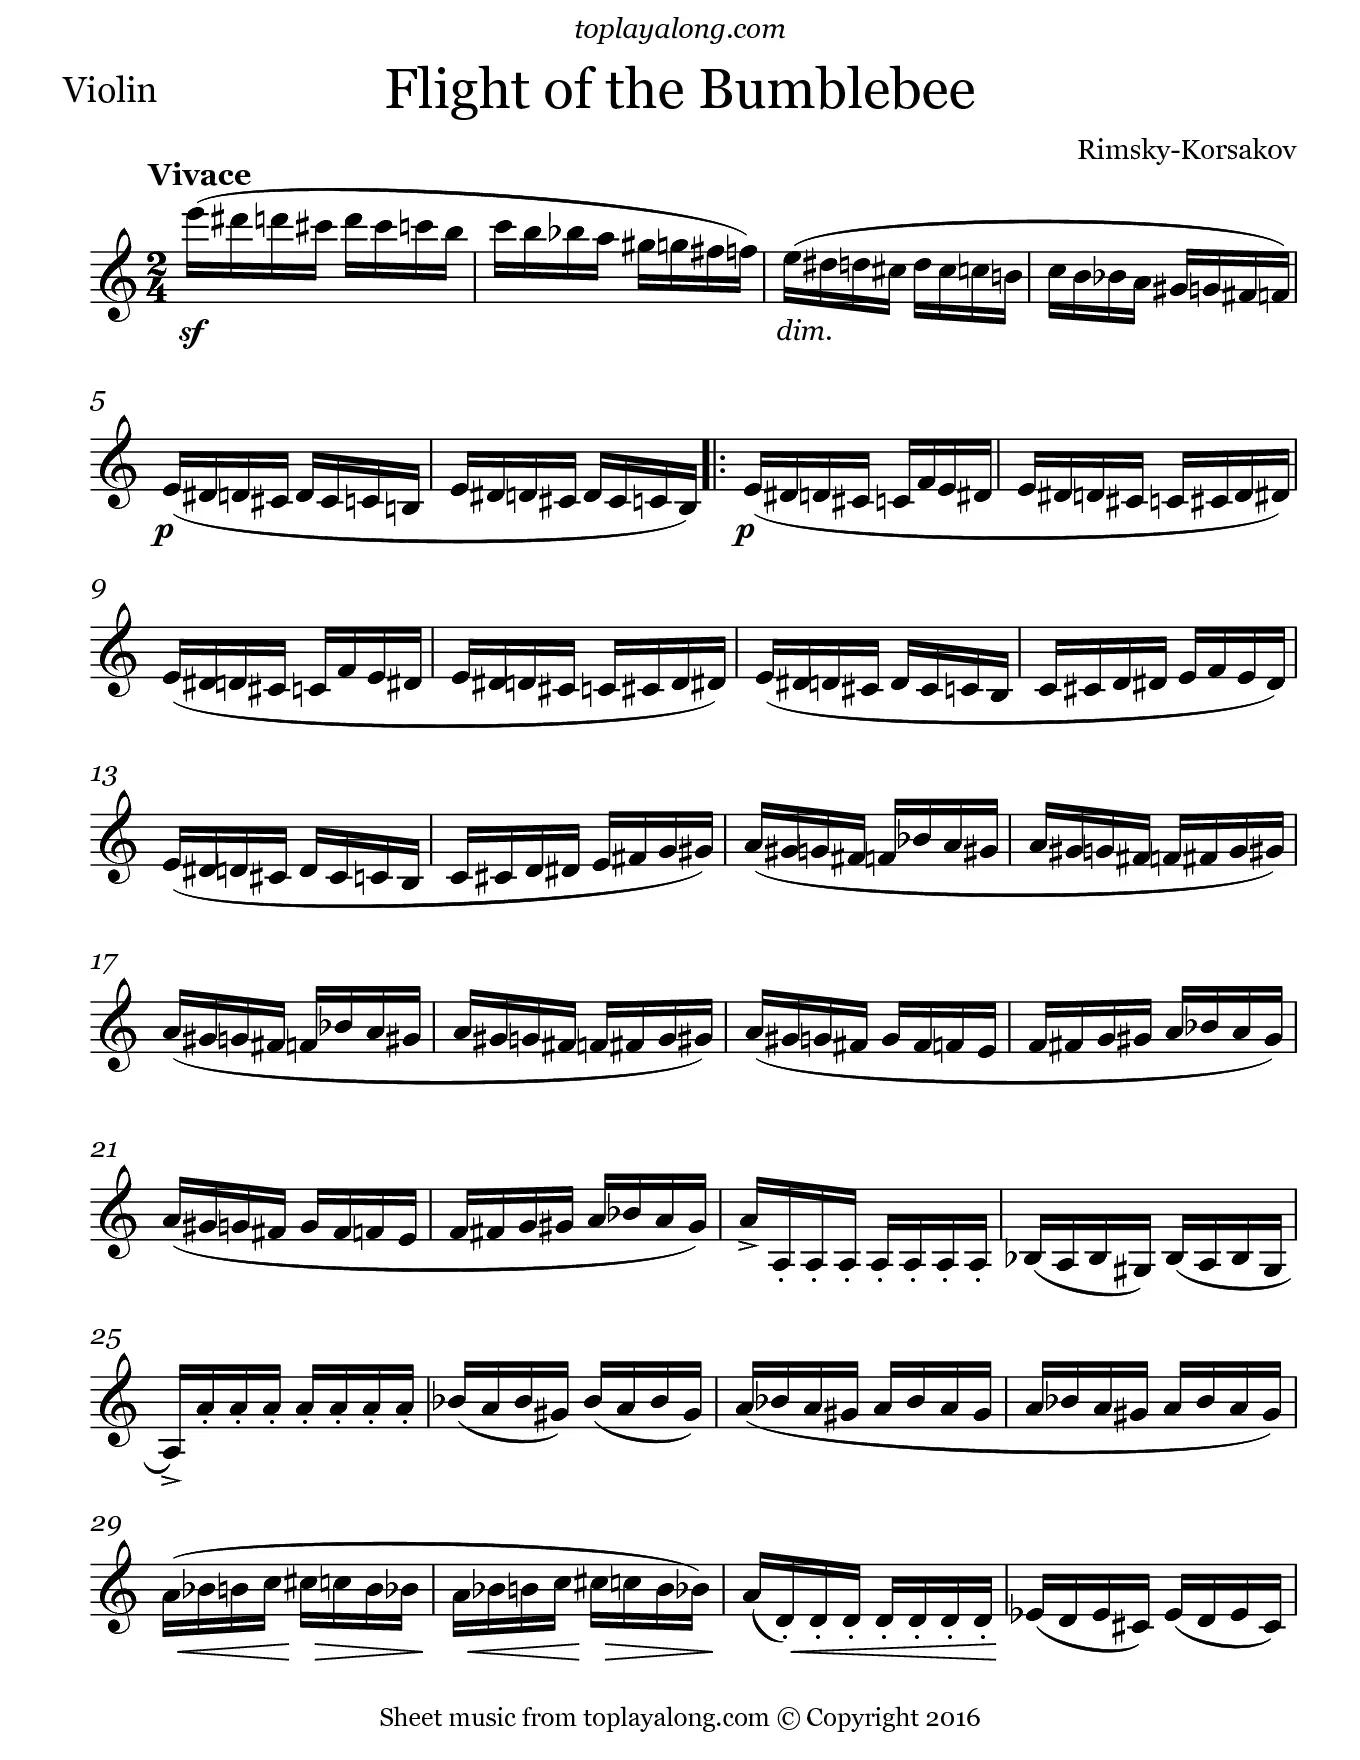 flight of the bumblebee violin sheet - What level is Flight of the Bumblebee